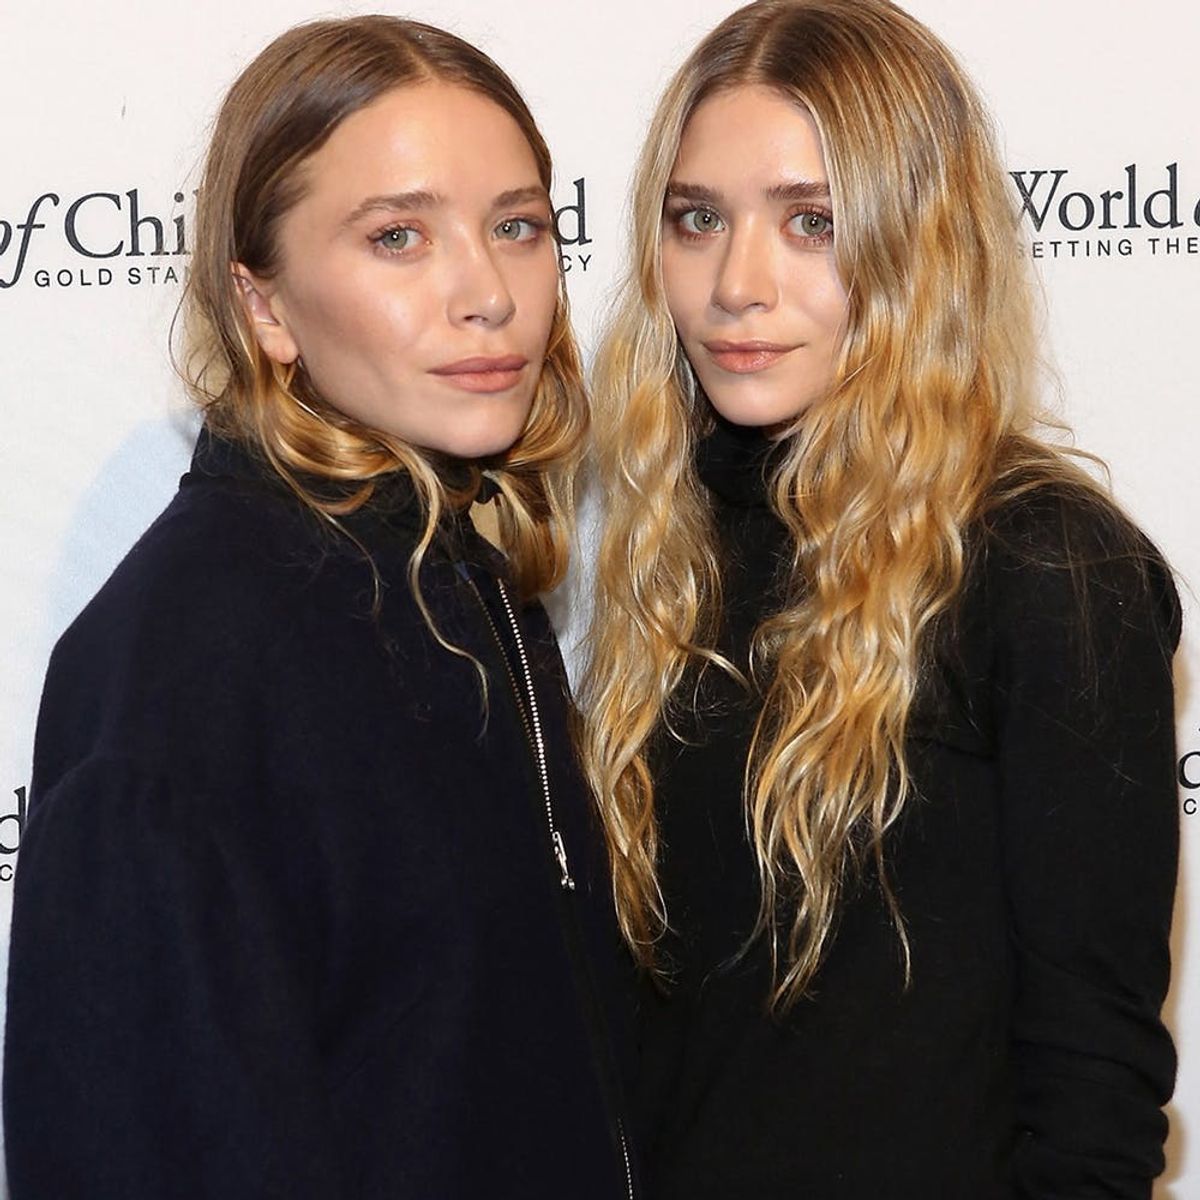 The Ultra Cheap Hair Hack the Olsen Twins Swear By